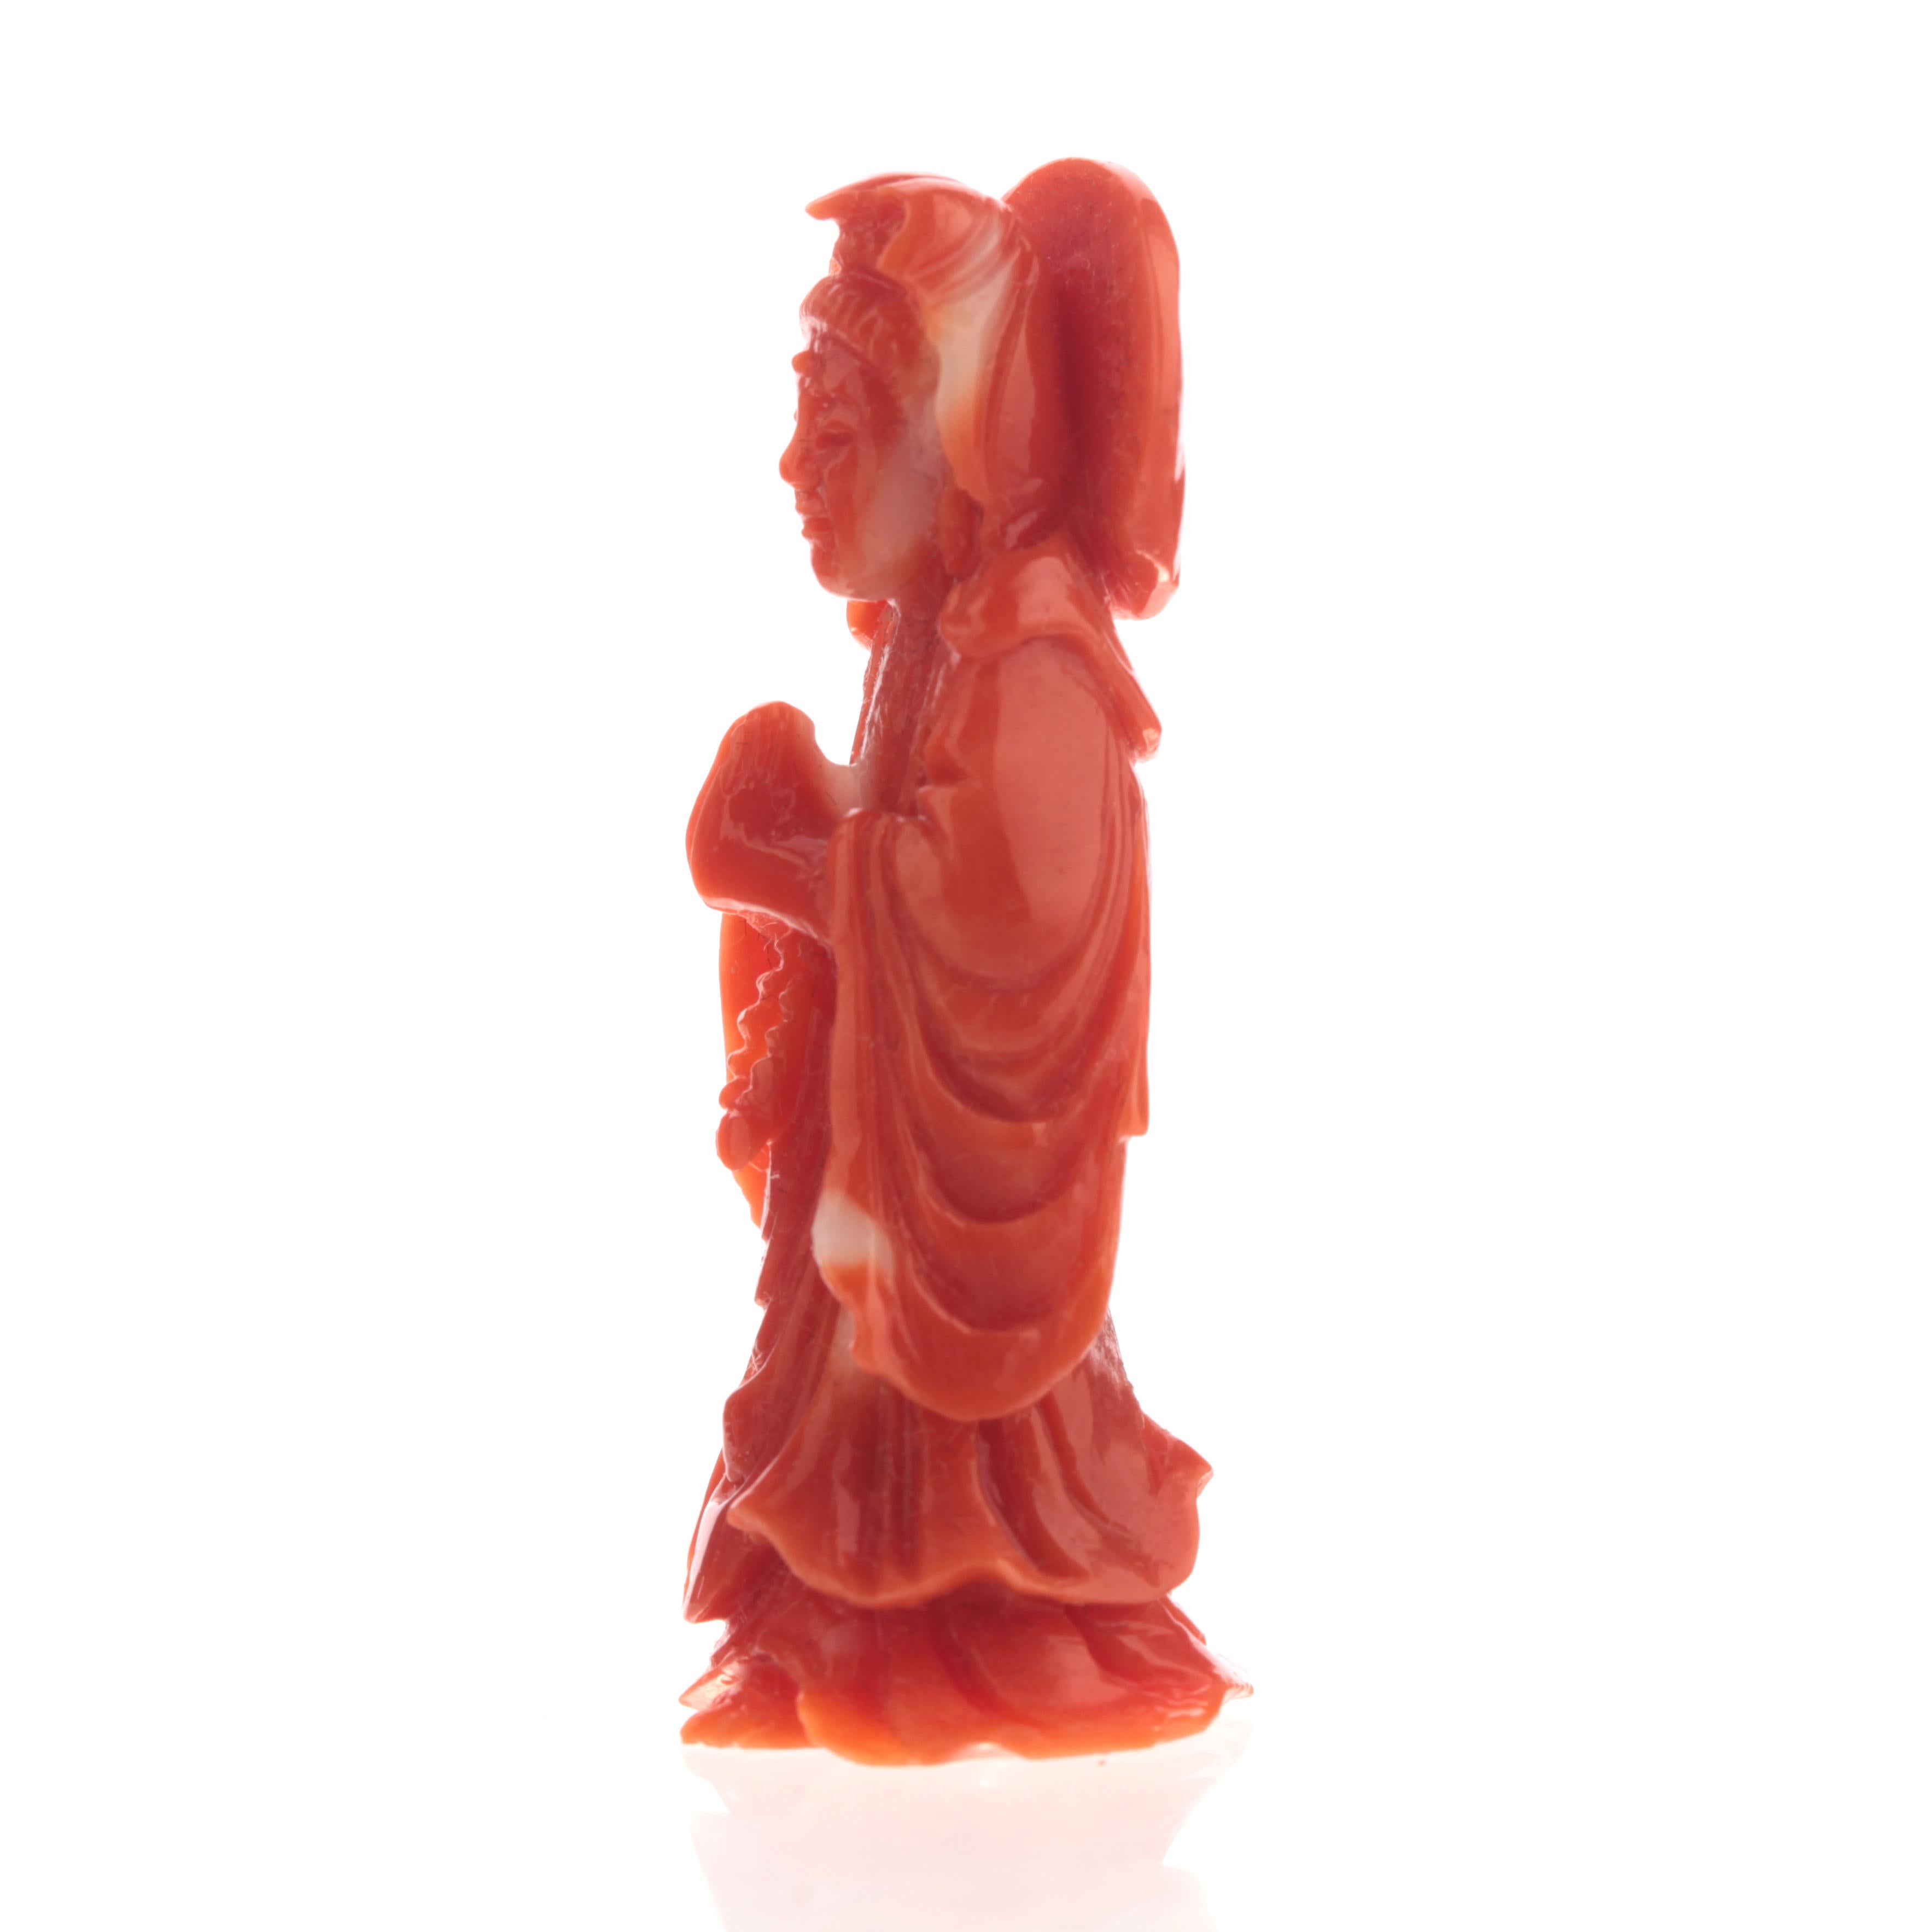 red mary statue